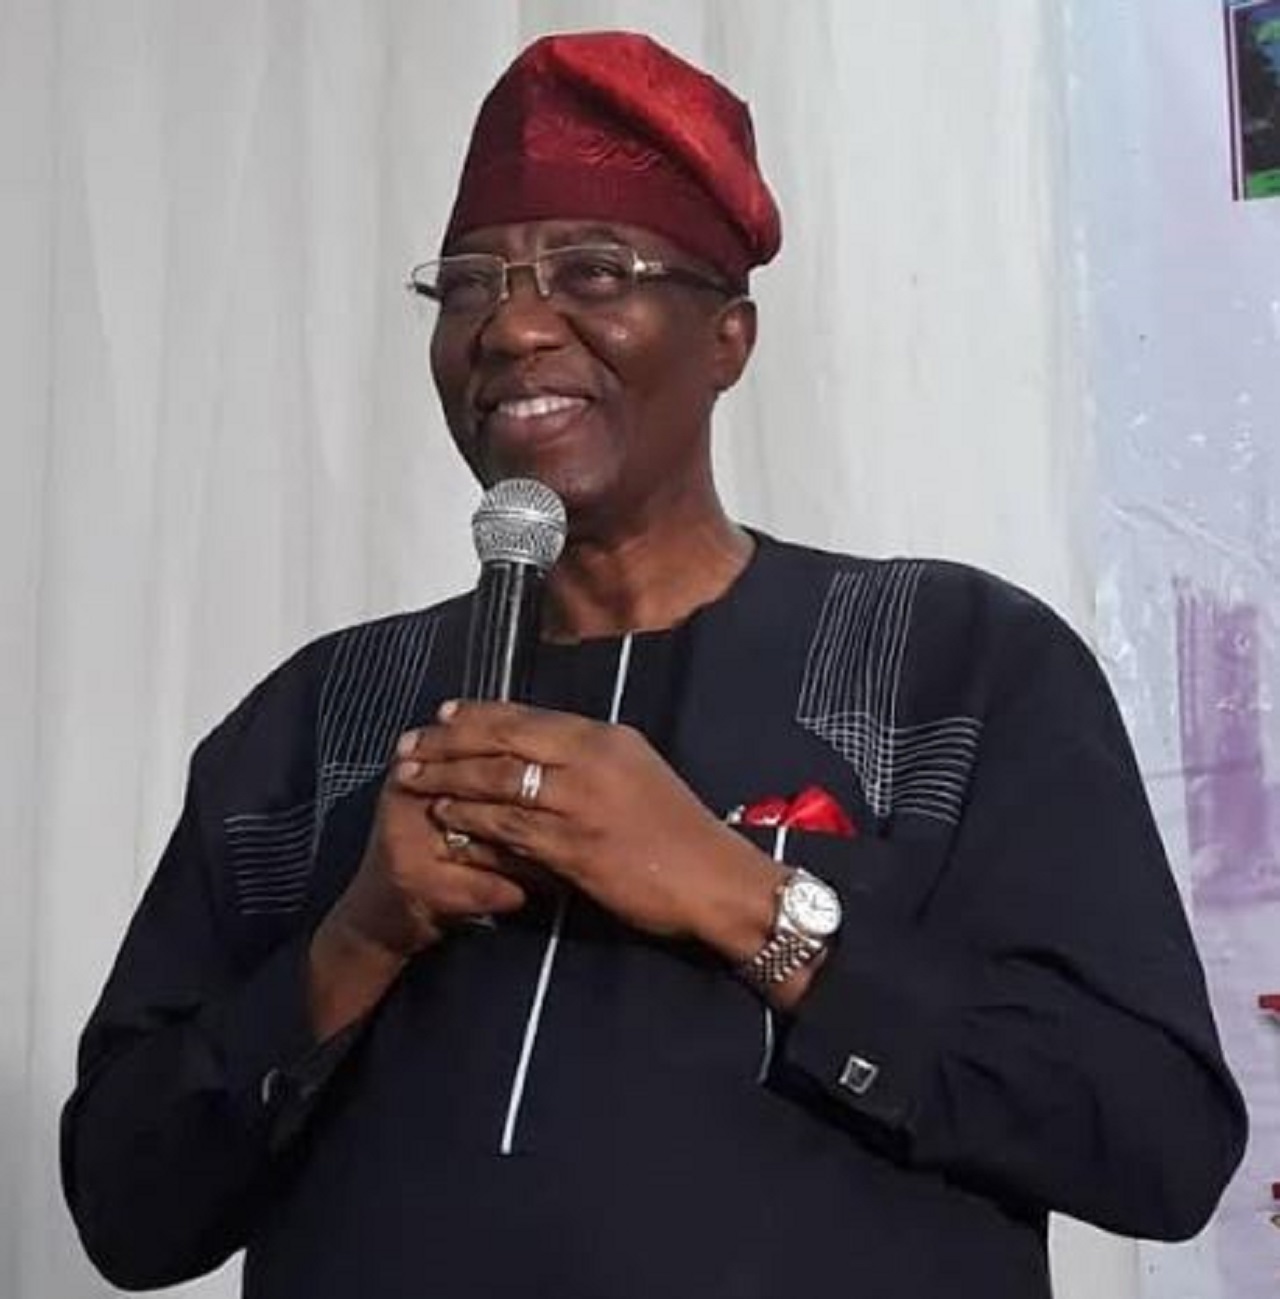 I Didn’t Steal Money Or Land, But I’m Not A Saint – Ogun Former Governor, Gbenga Daniel